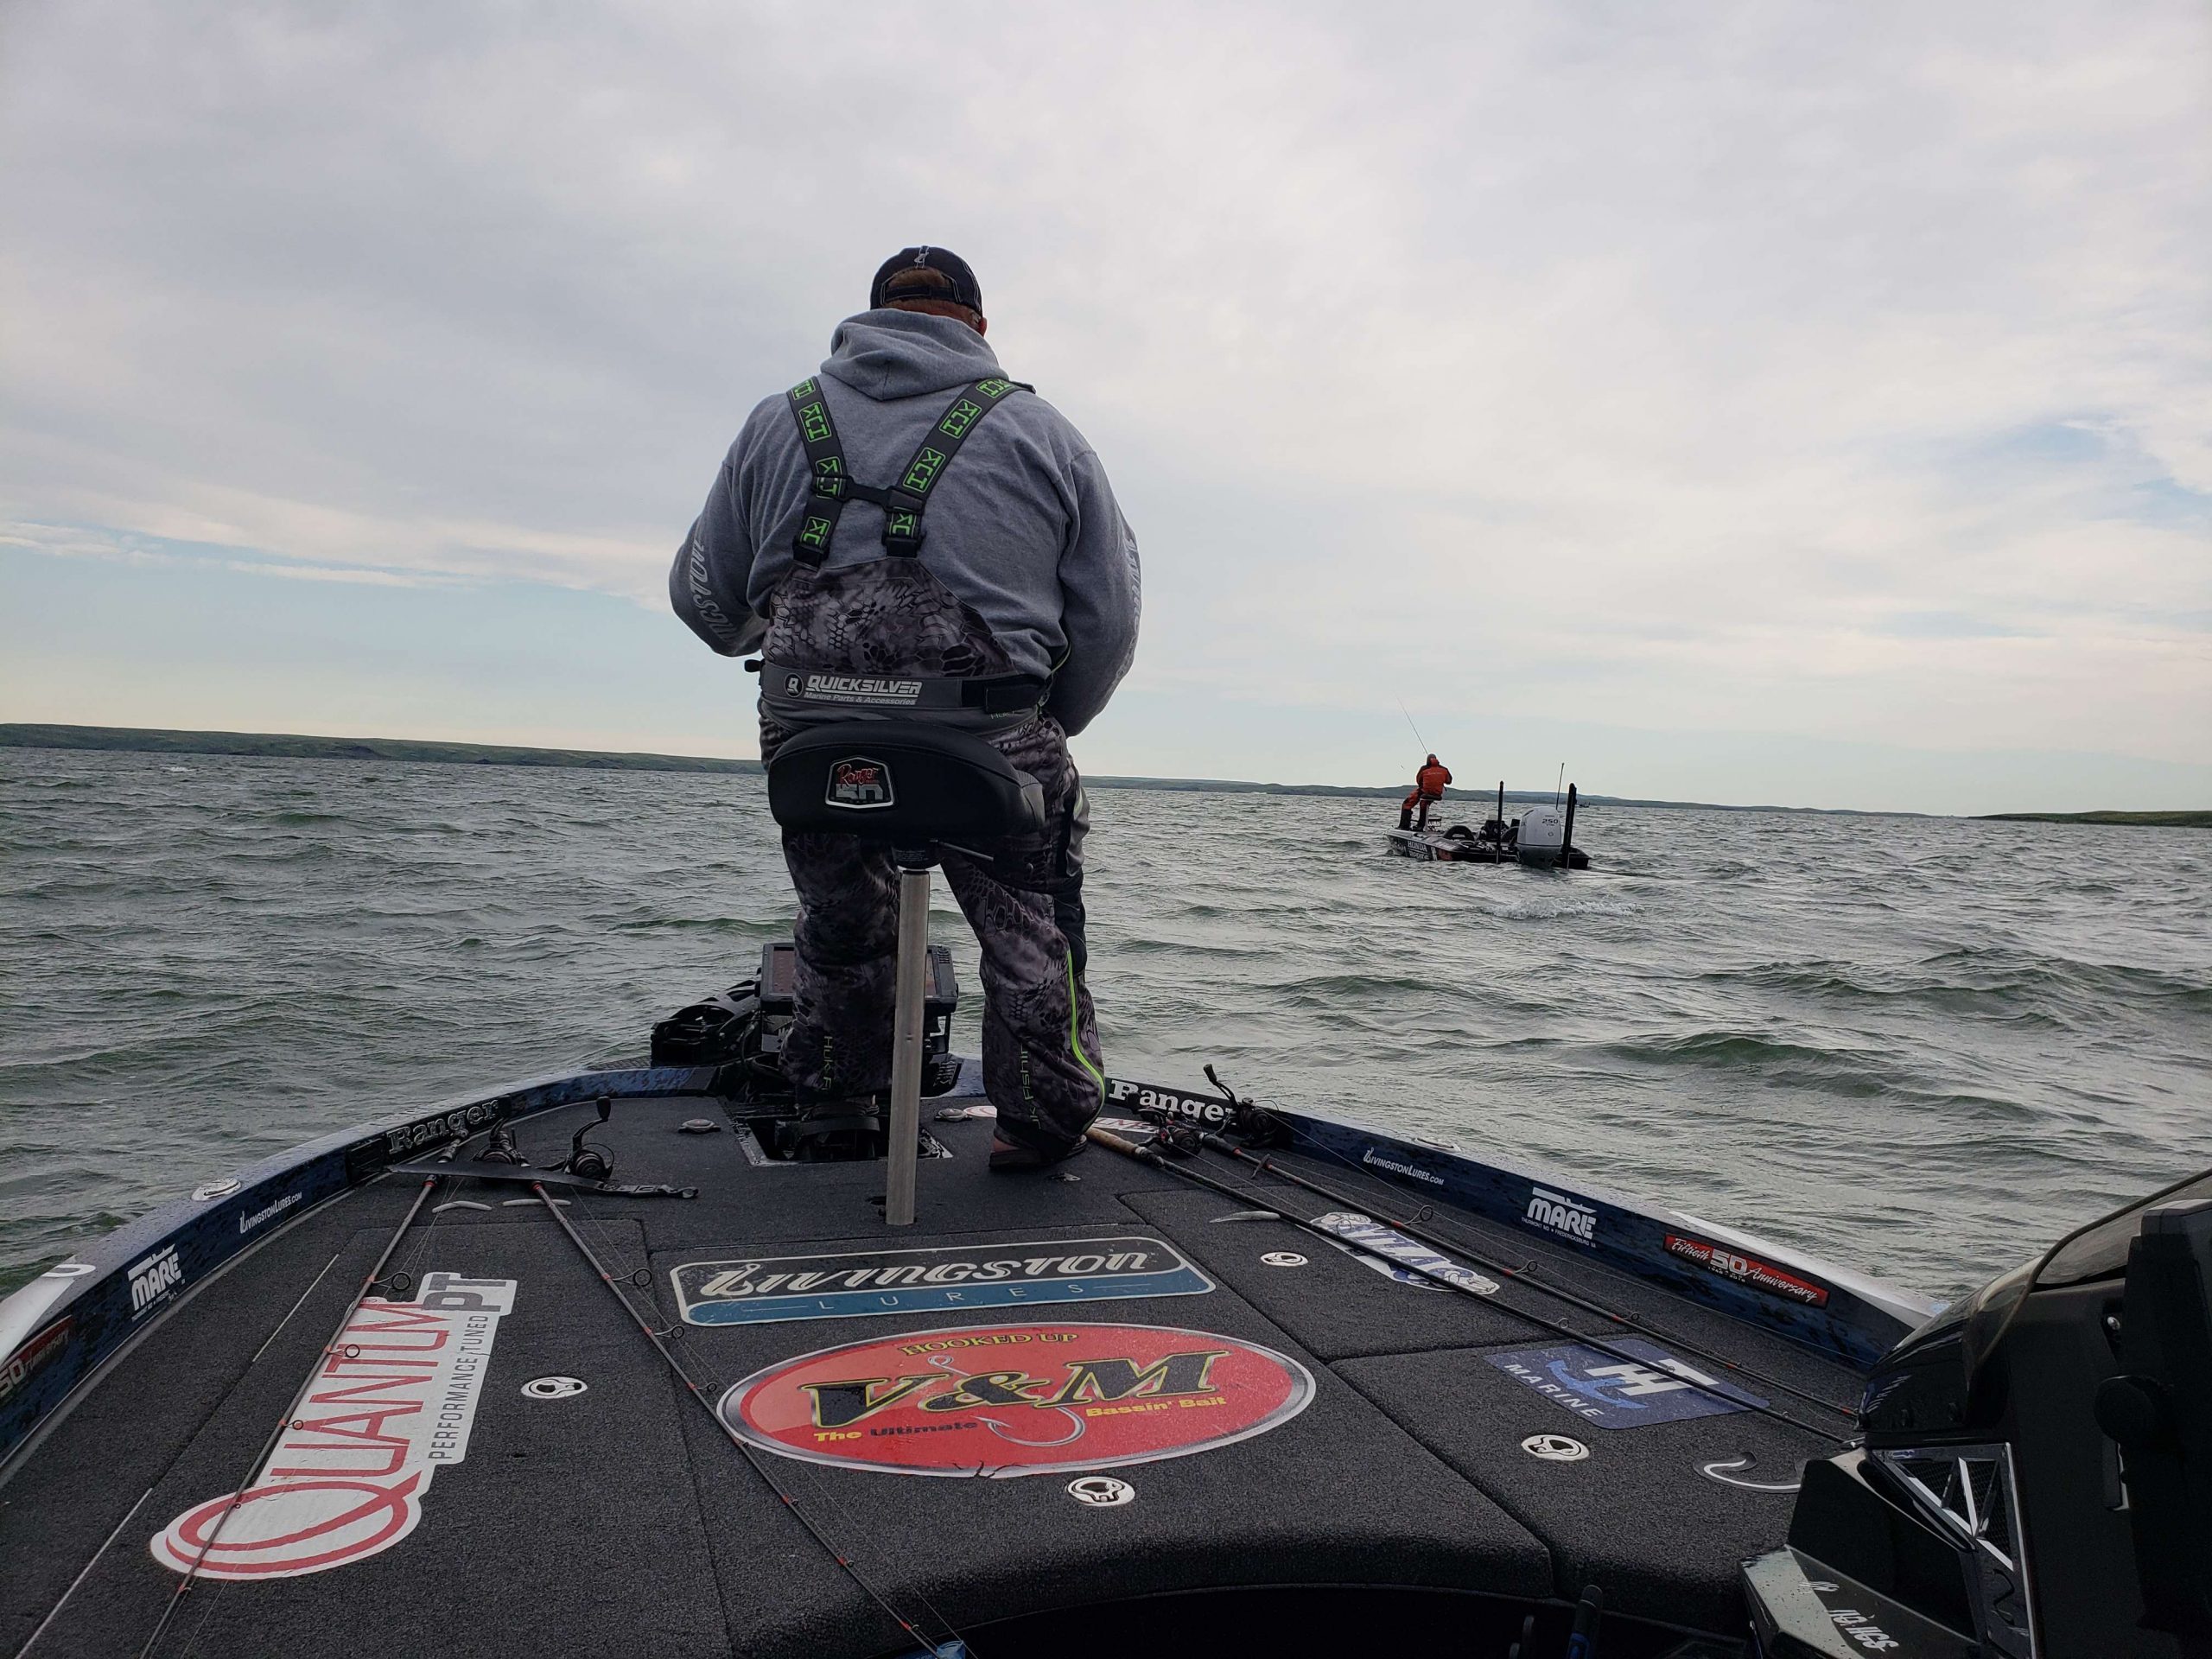 Big lake is fishing a little small right away as Powrnoznik and Wiggins fish in close quarters. 